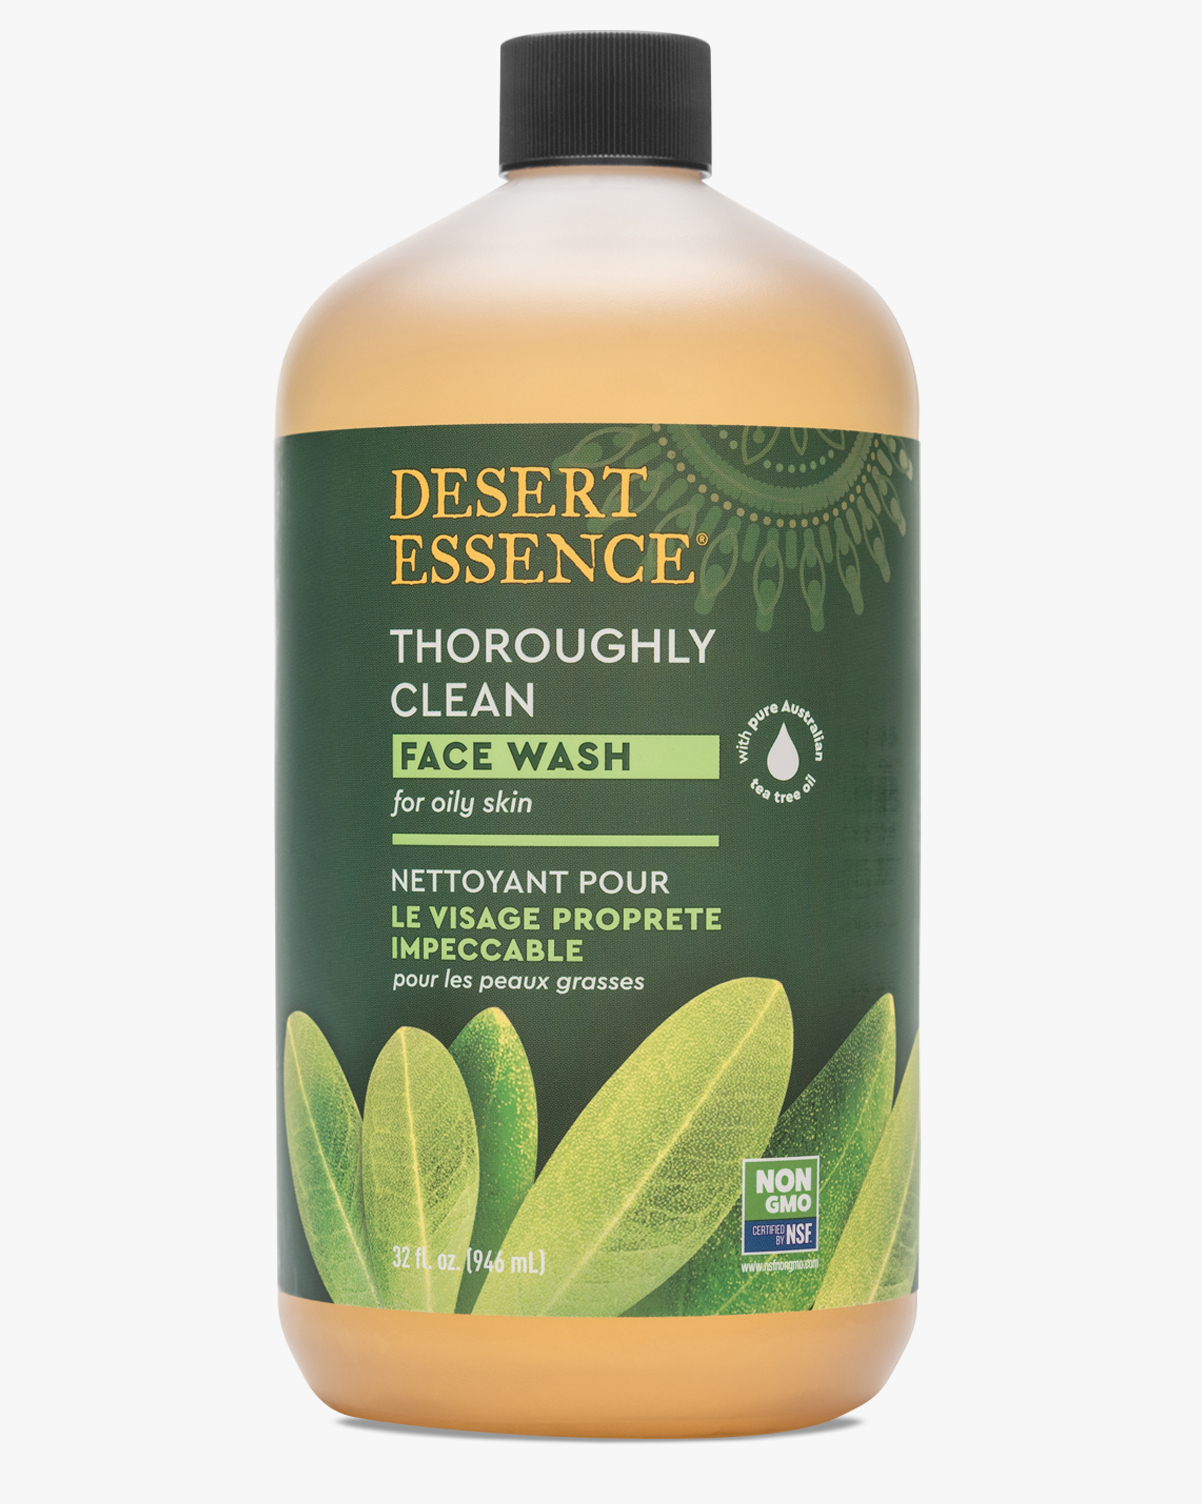 Desert Essence Thoroughly Clean Face Wash - Original - 32 Fl Ounce - Tea Tree Oil - For Soft Radiant Skin - Gentle Cleanser - Extracts Of Goldenseal, Awapuhi, & Chamomile Essential Oils